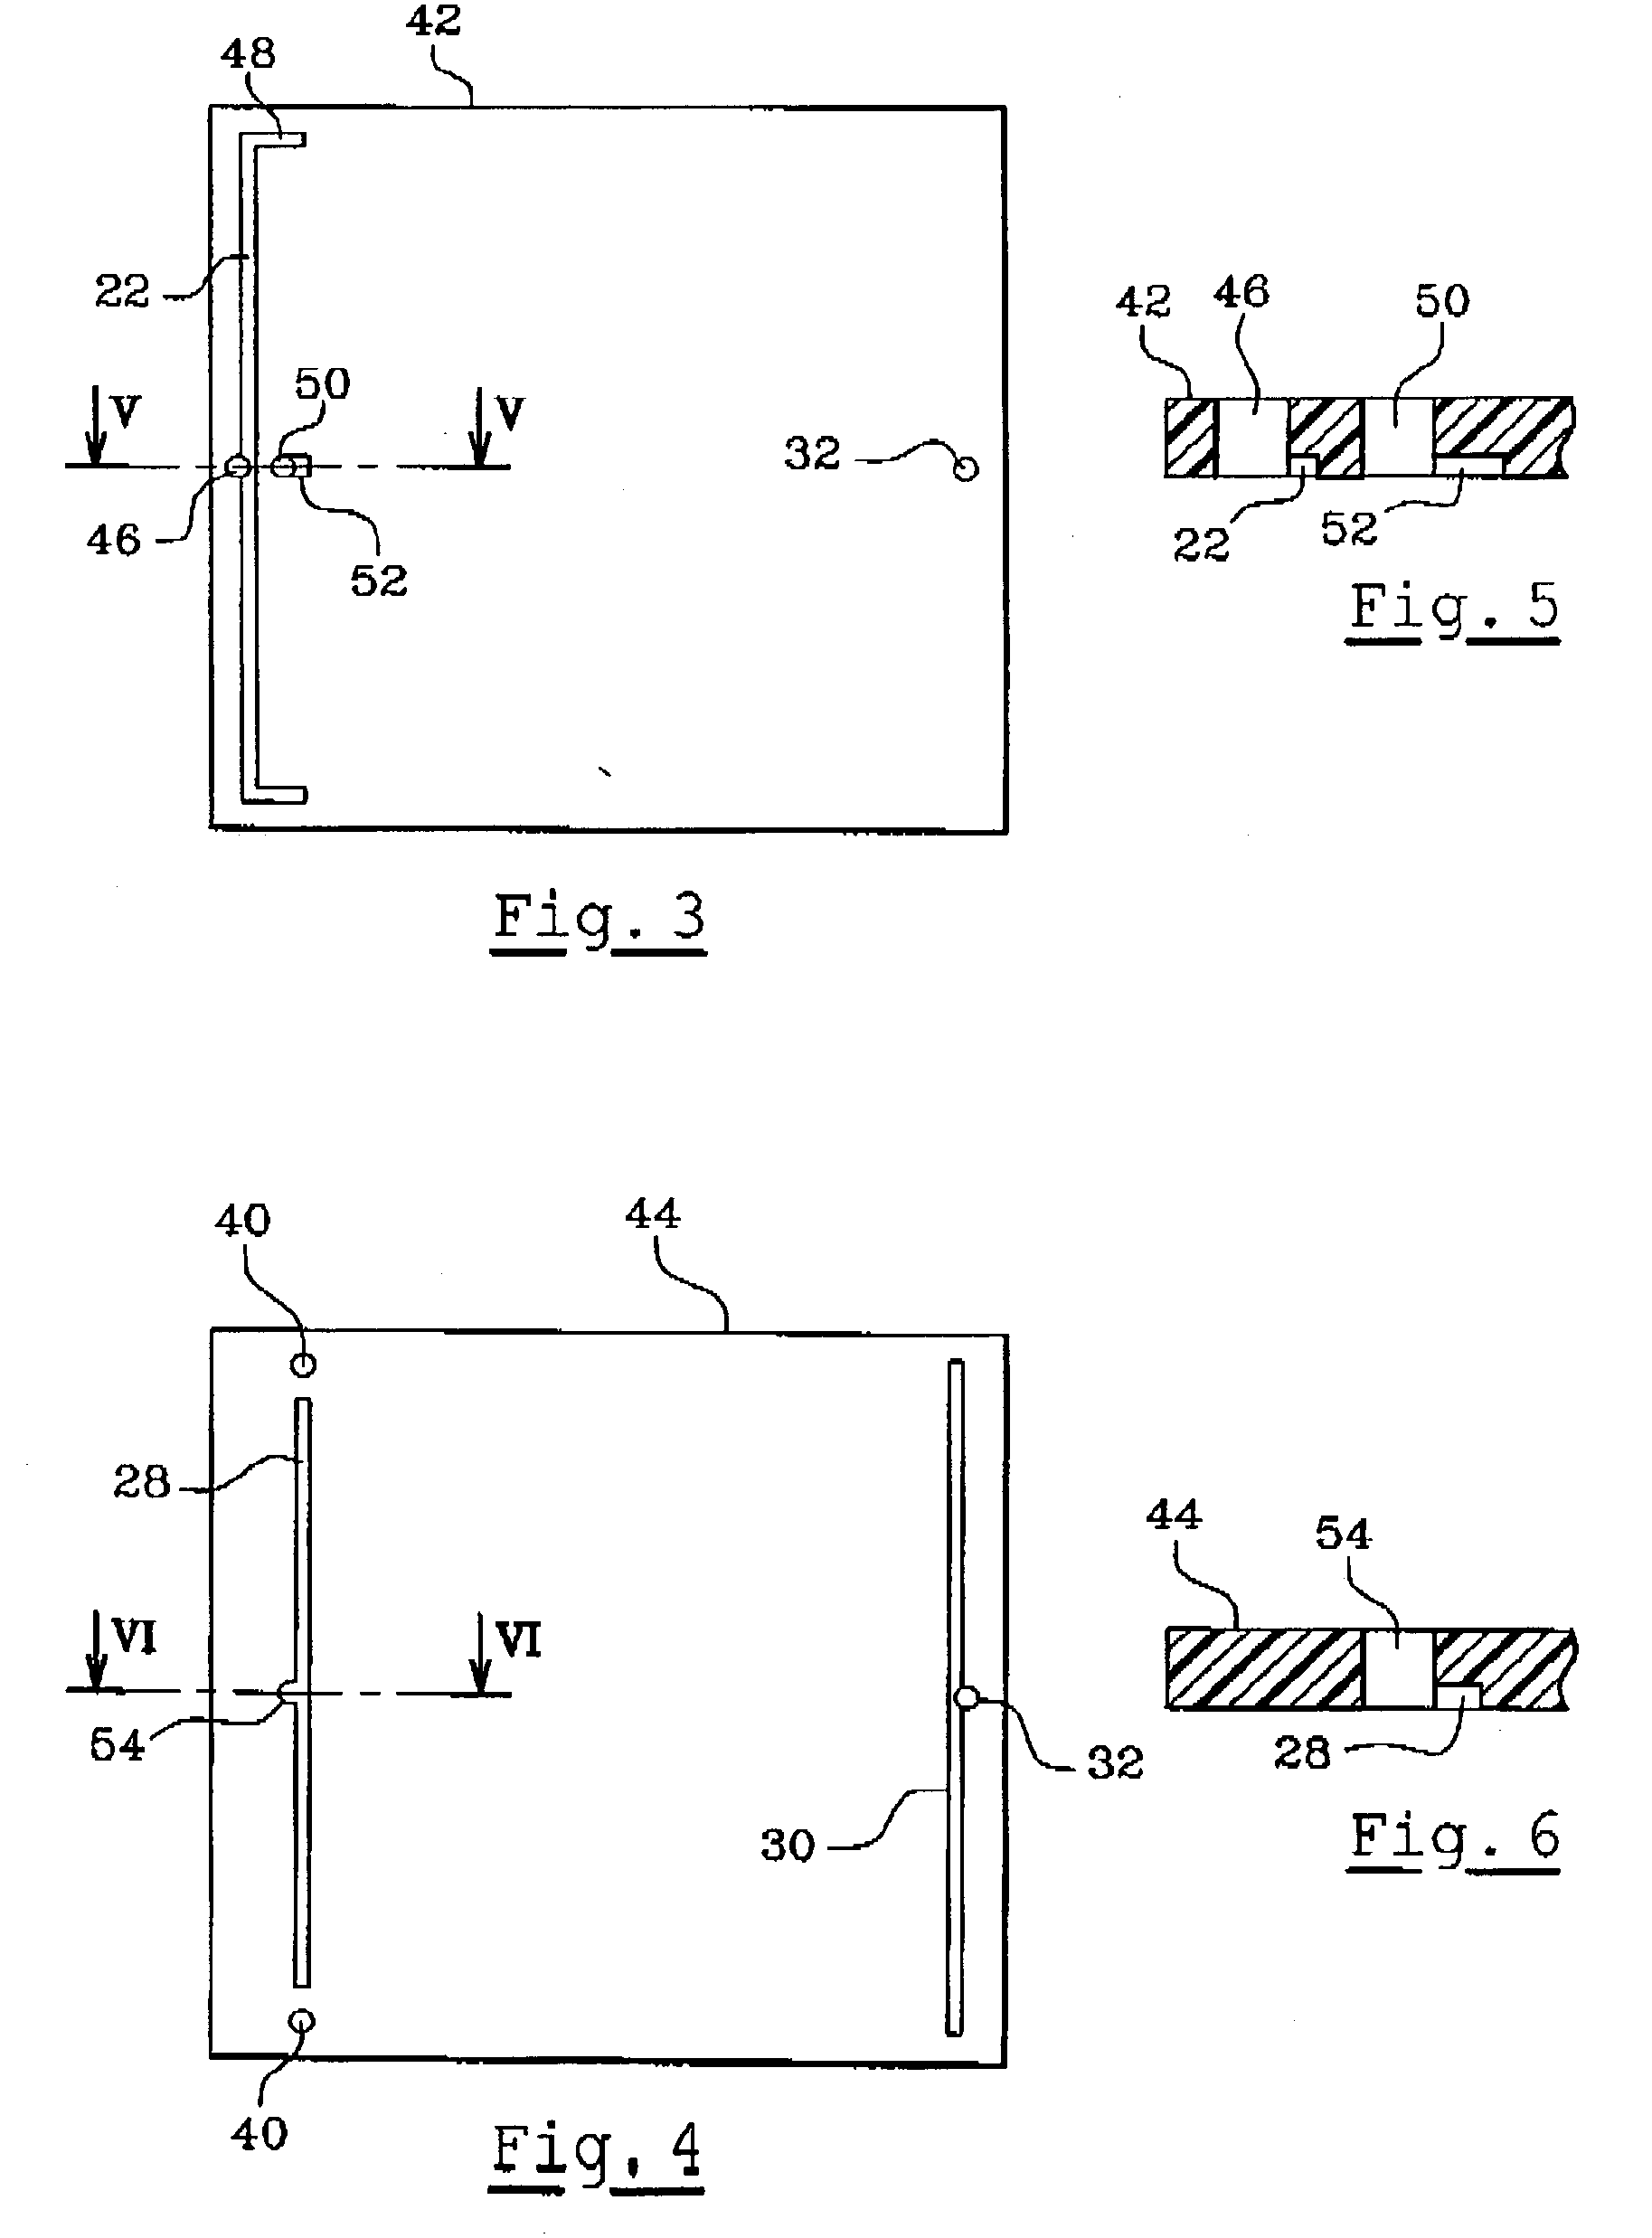 Apparatus for separating sample components by liquid chromatography under pressure